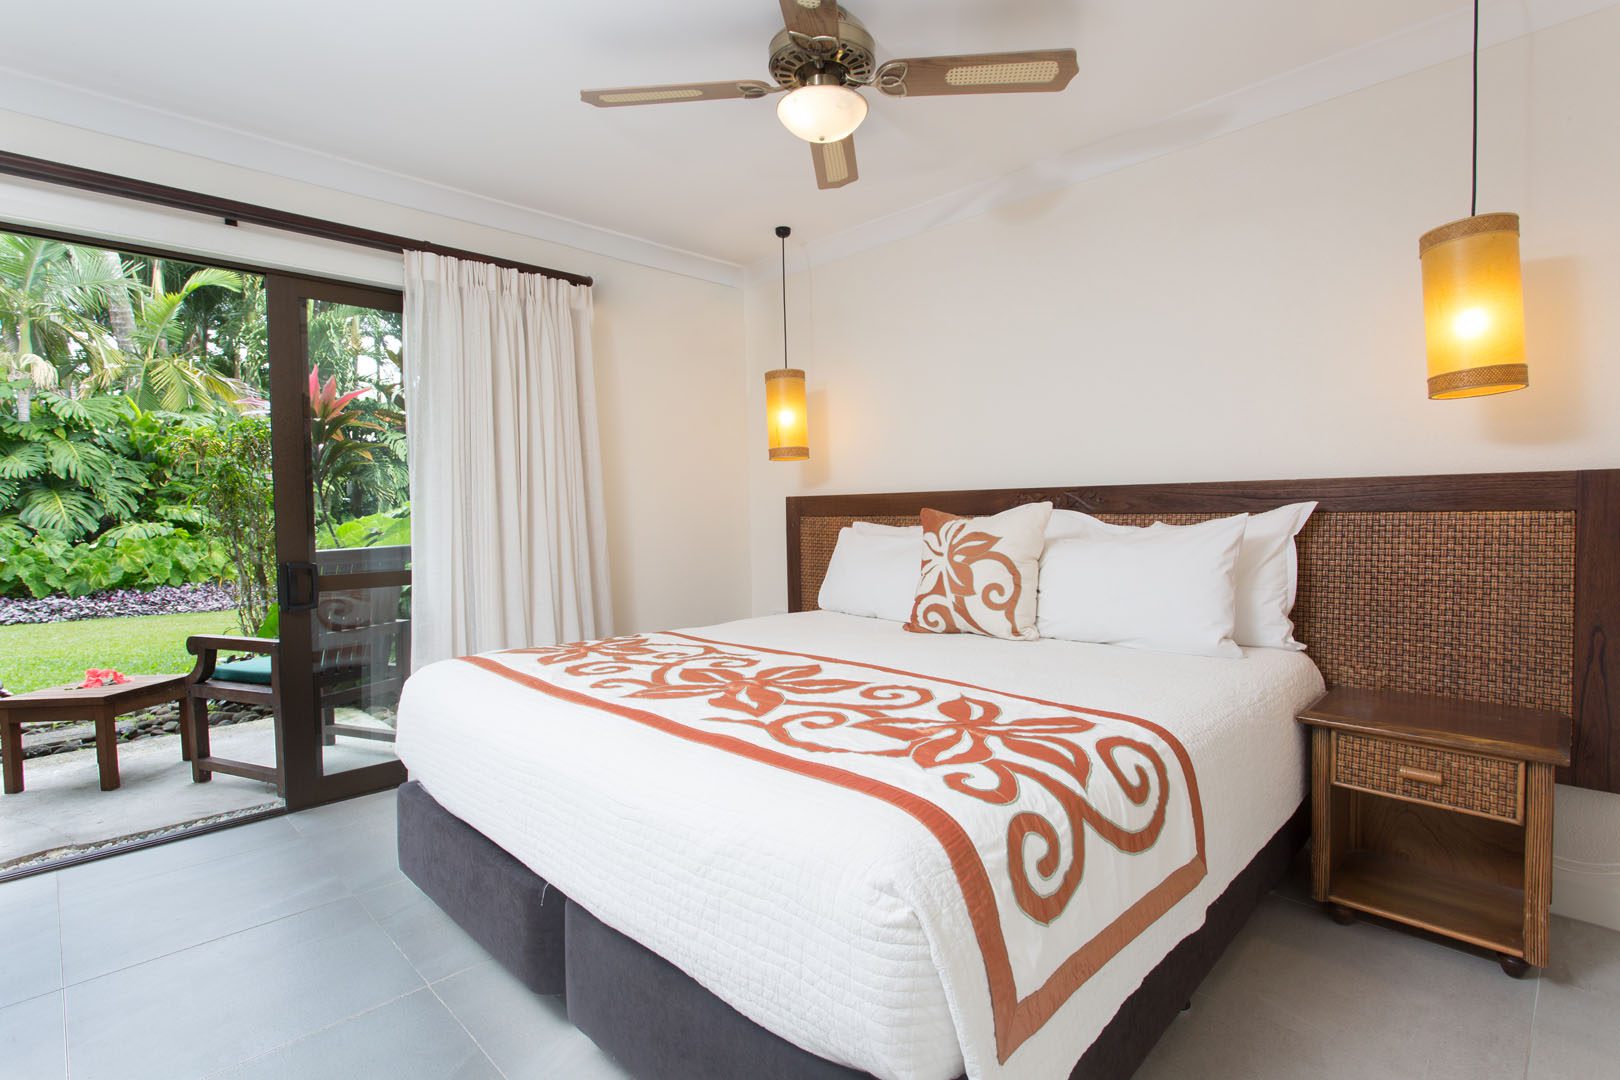 Image of the Super King-sized bed in the Family Room showcasing a beautiful garden view outside the balcony